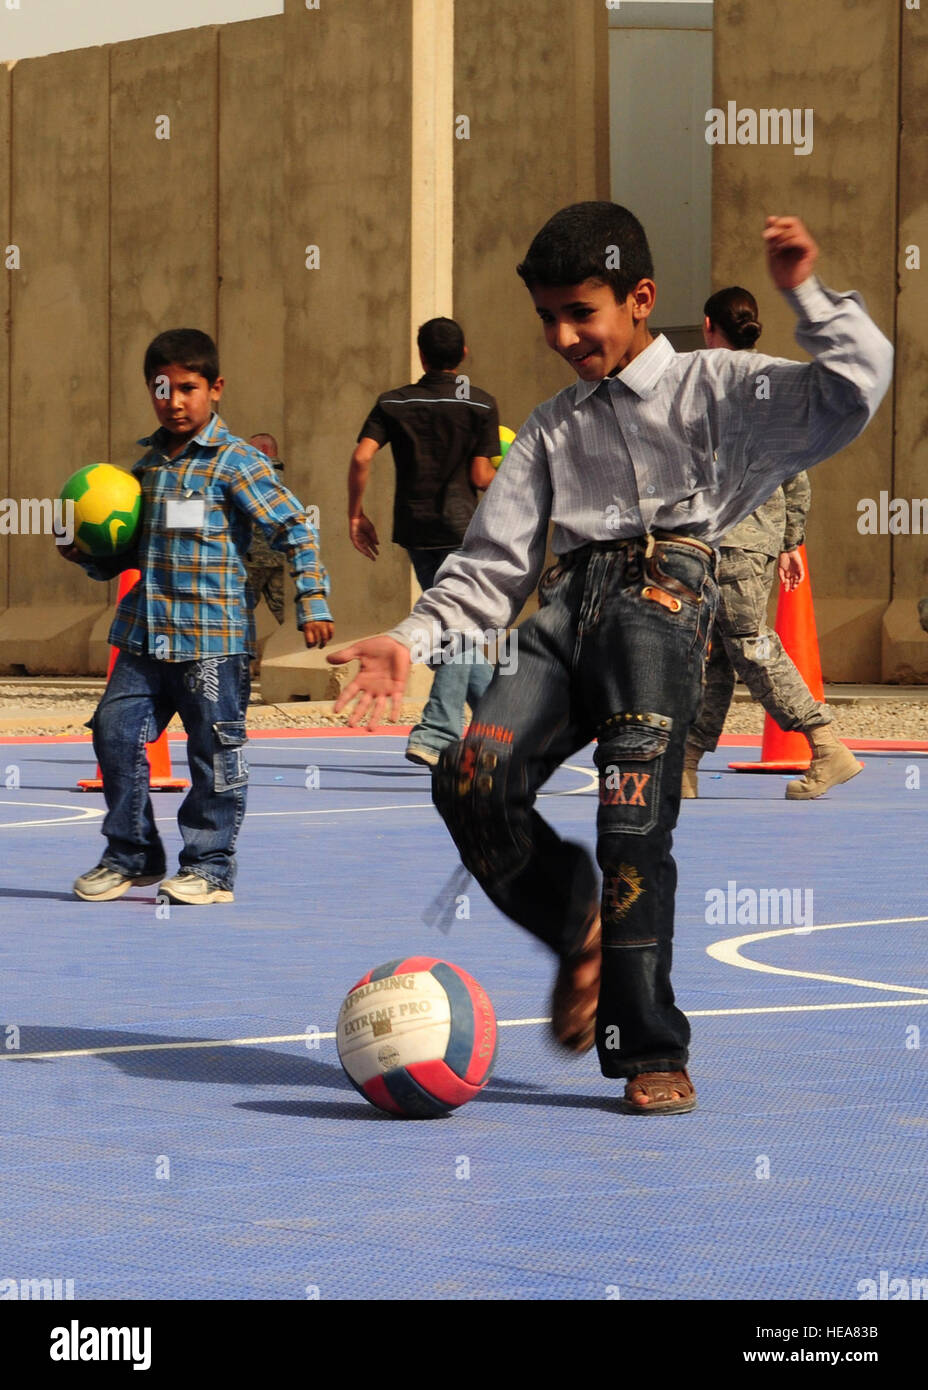 JOINT BASE BALAD, Iraq -- An Iraqi child kicks a soccer ball in an effort to score a goal during the Iraqi Kids Day here Oct. 10, 2009. JBB hosted 125 children, parents and officials, increasing community relations with surrounding villages.  Staff Sgt. Heather M. Norris) (Released) Stock Photo